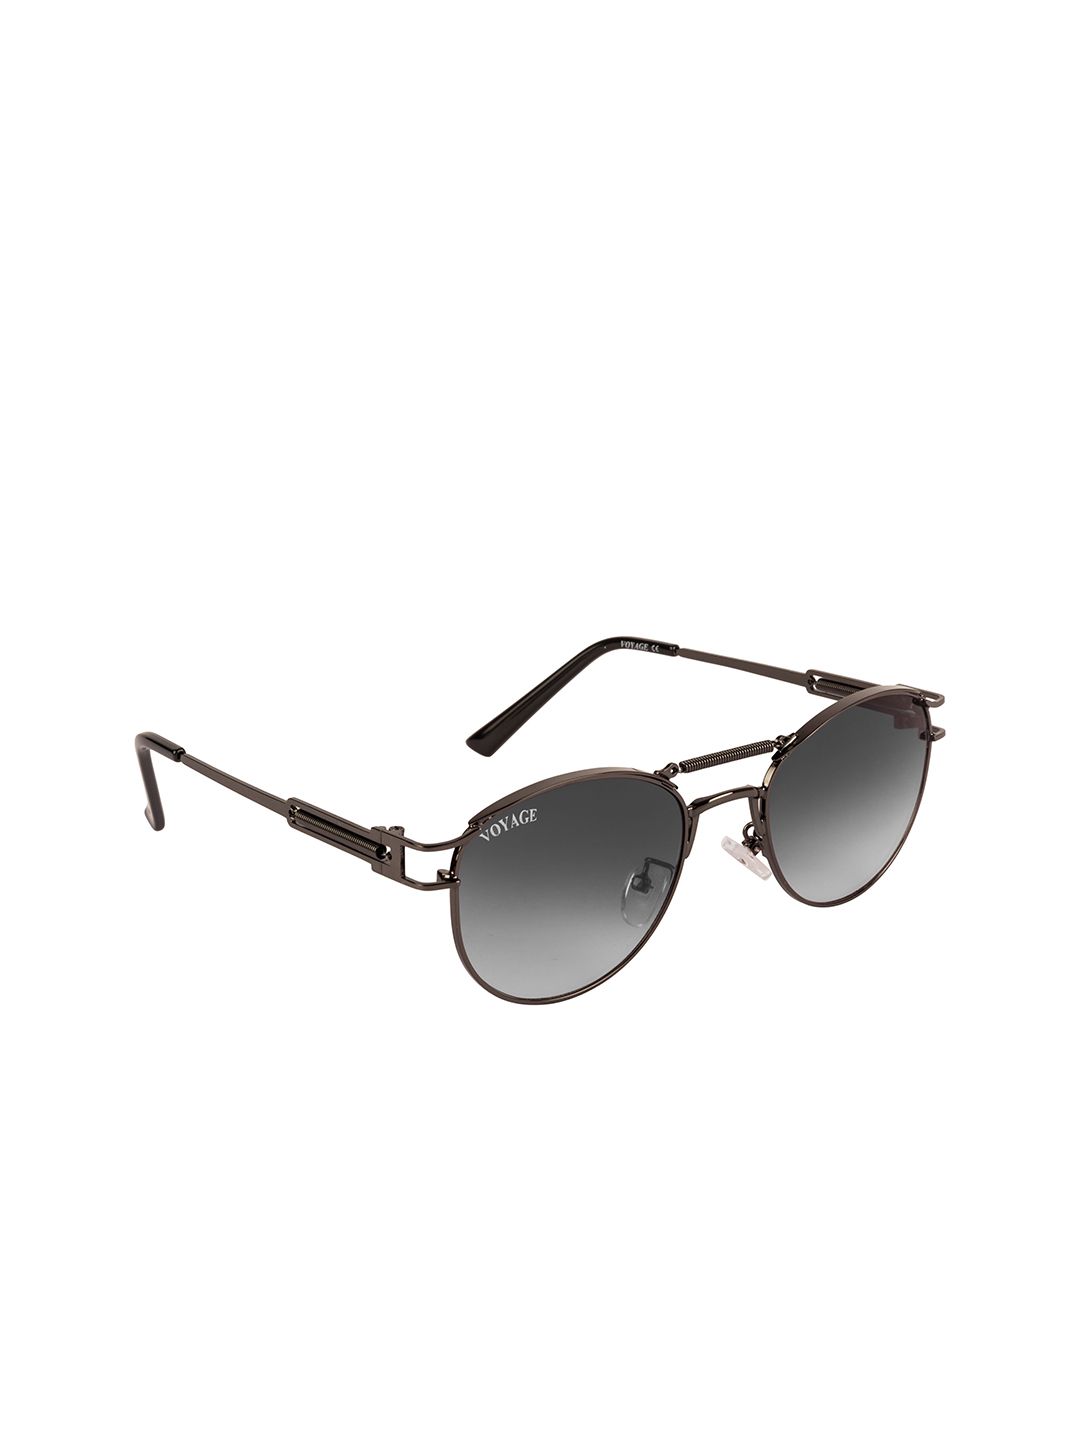 Voyage Grey Lens & Black Round Sunglasses with UV Protected Lens Price in India